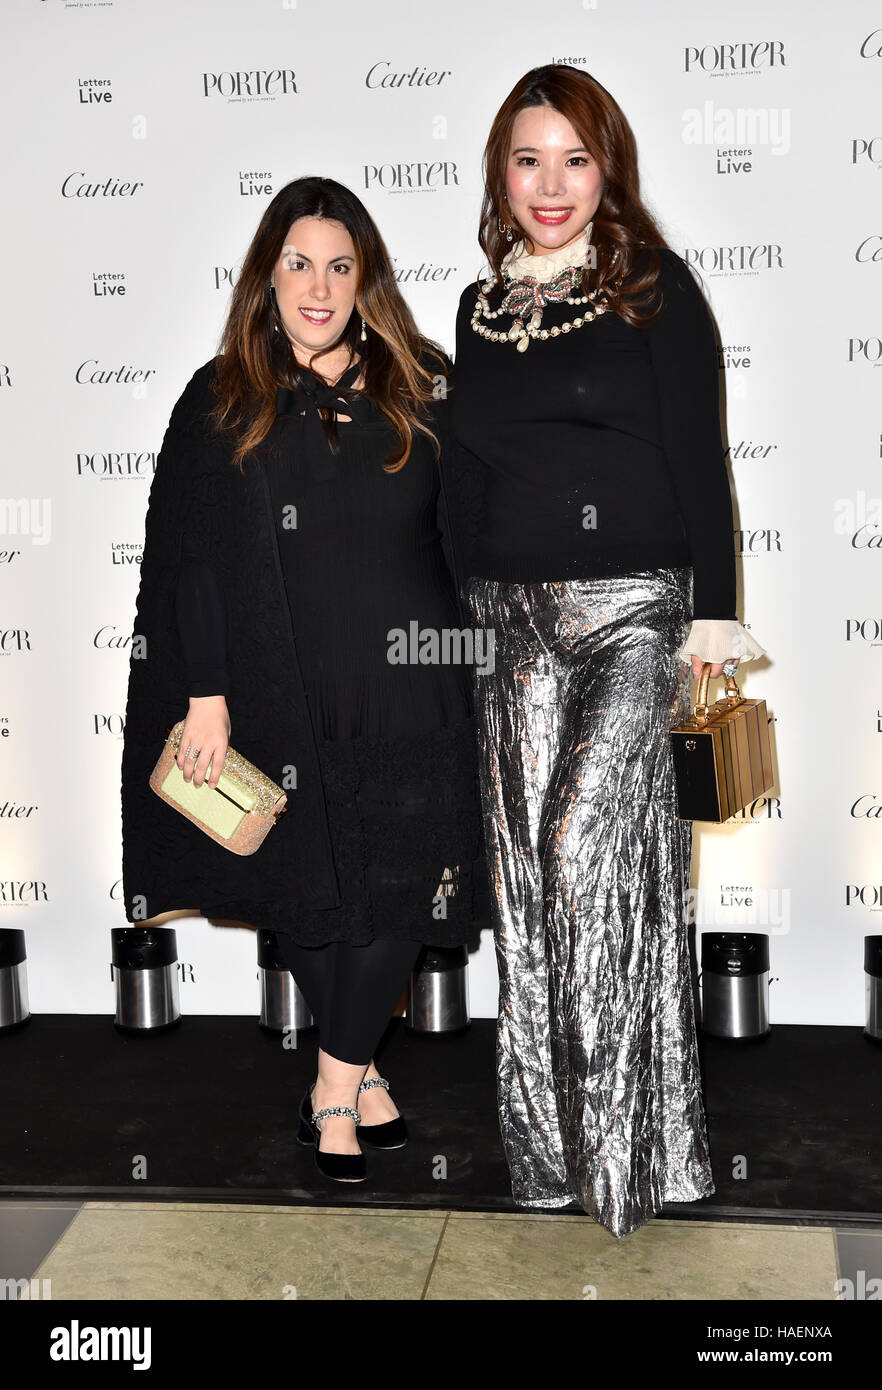 Mary Katrantzou and Wendy Yu (right) attending the Letters Live